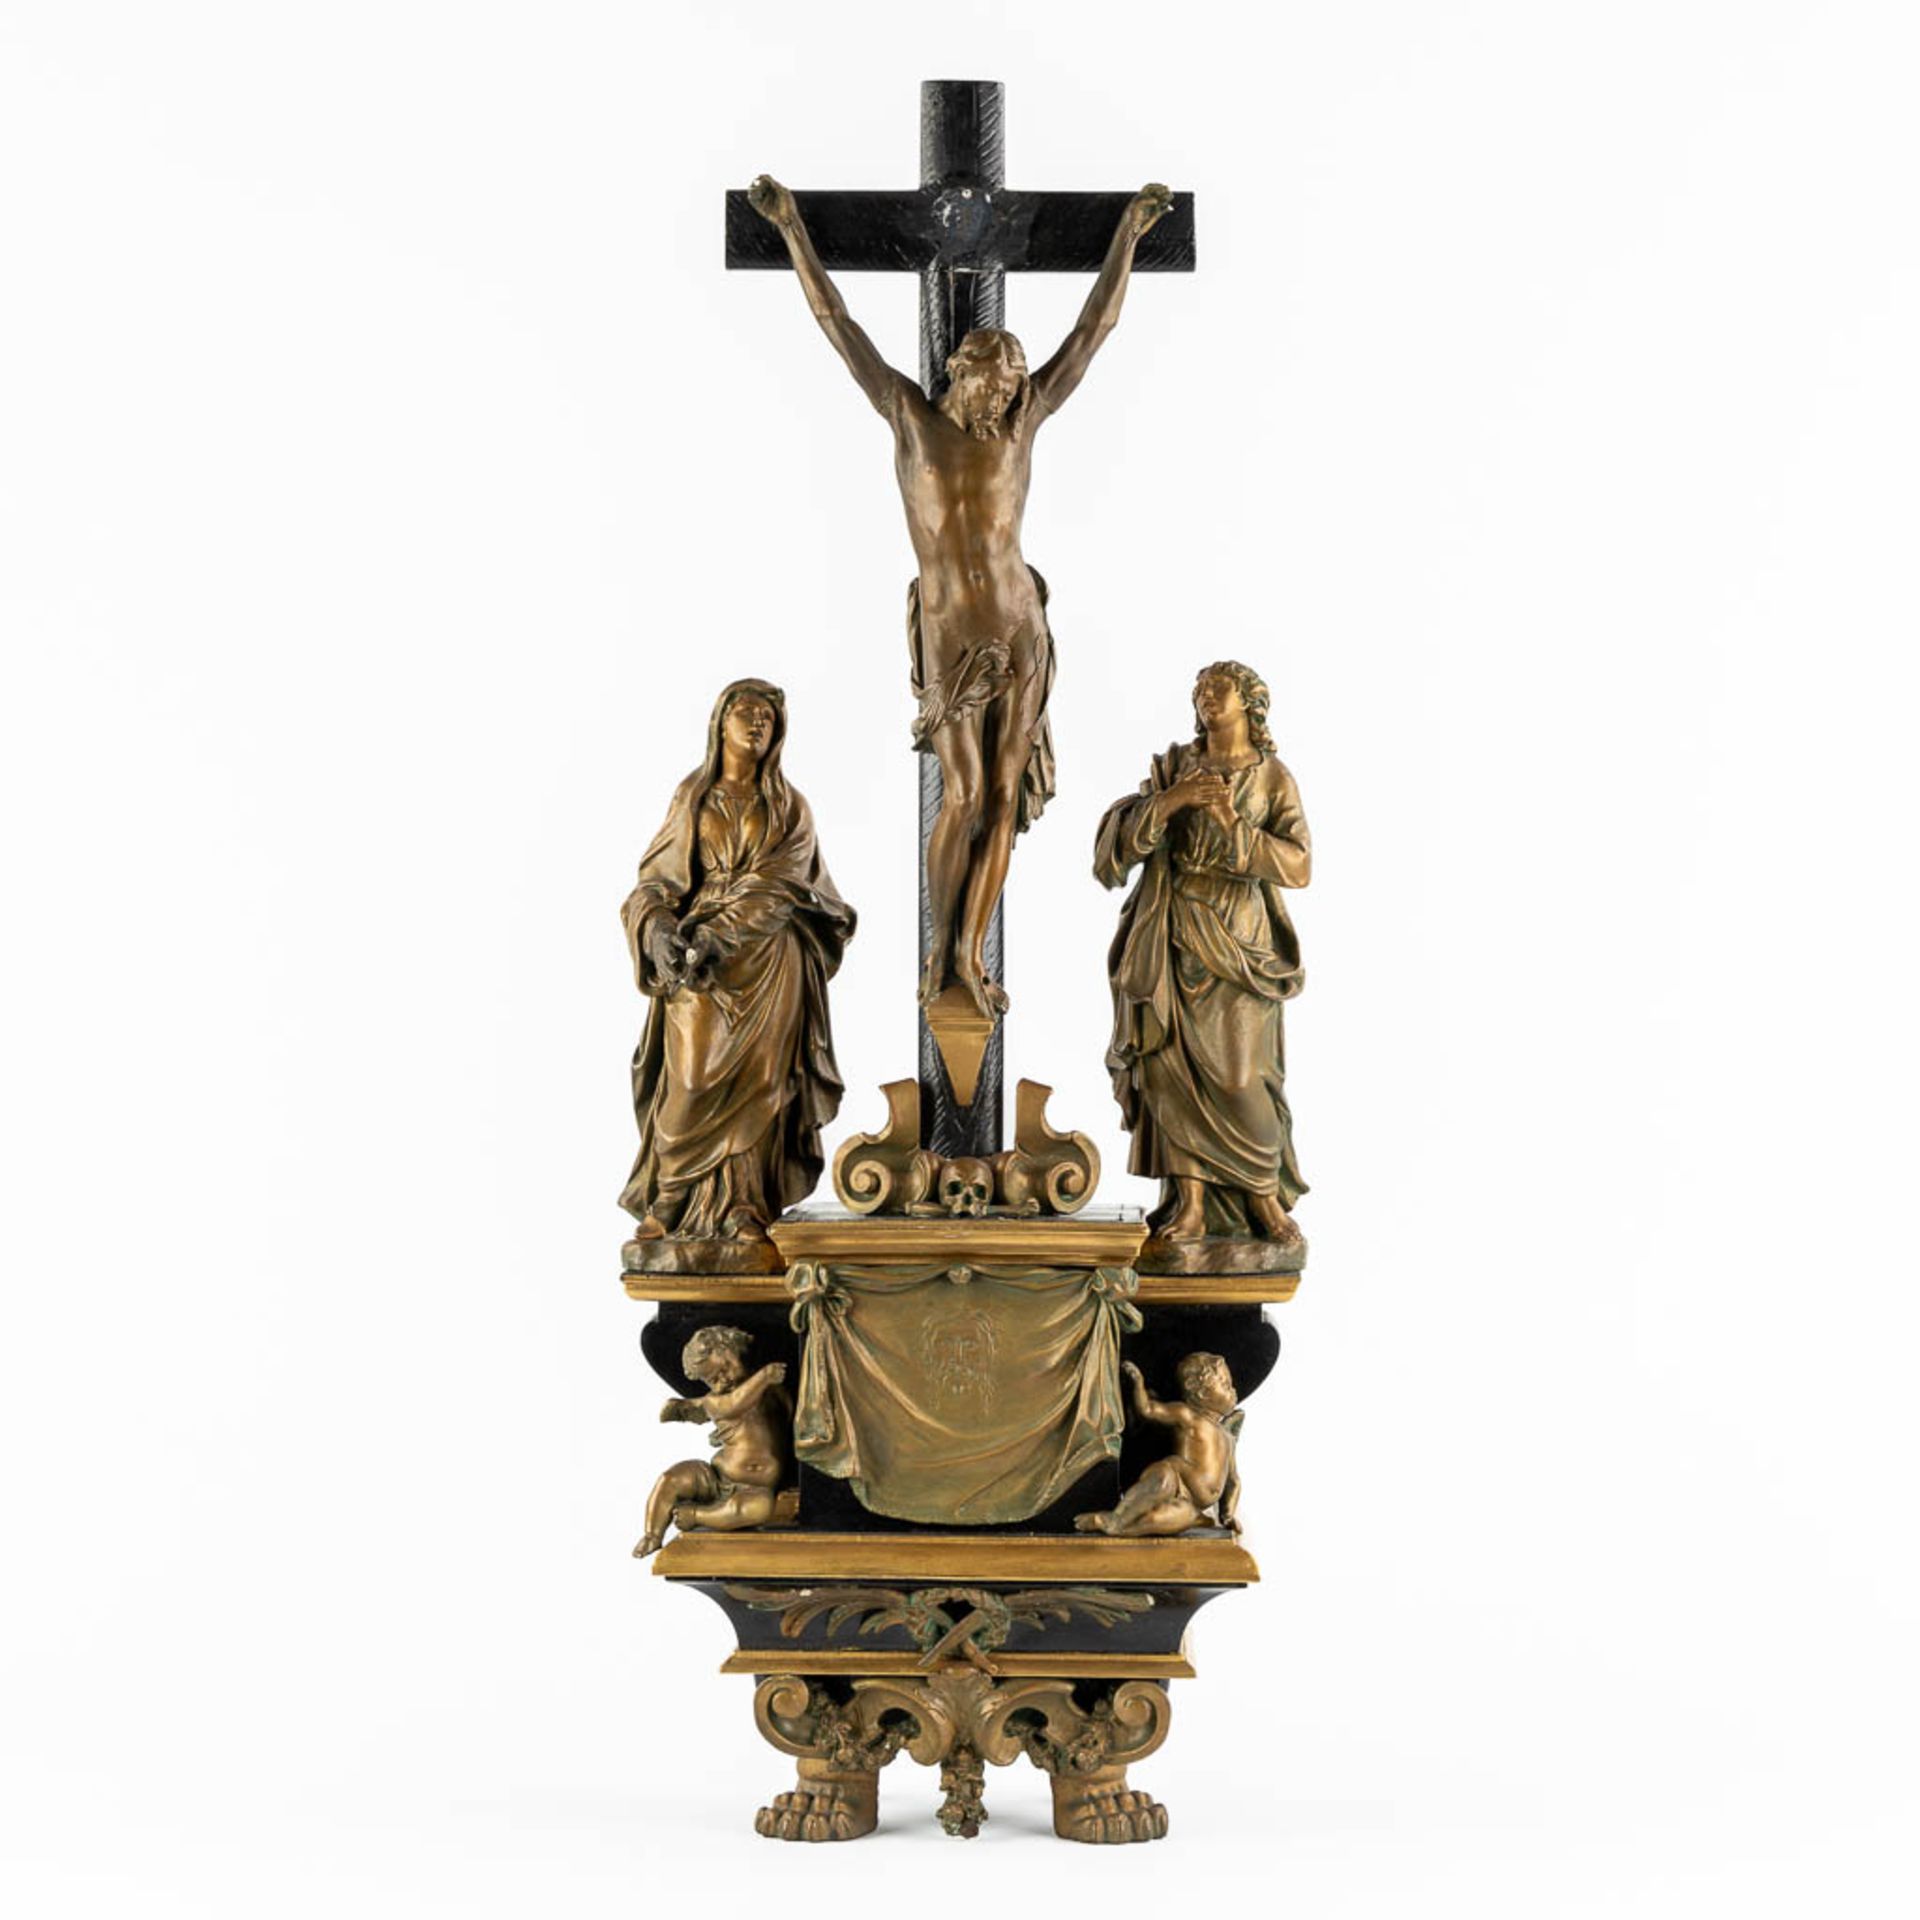 A large crucifix with a 3-piece golgotha, Veil of Veronica, patinated white clay. Circa 1900. (L:16 